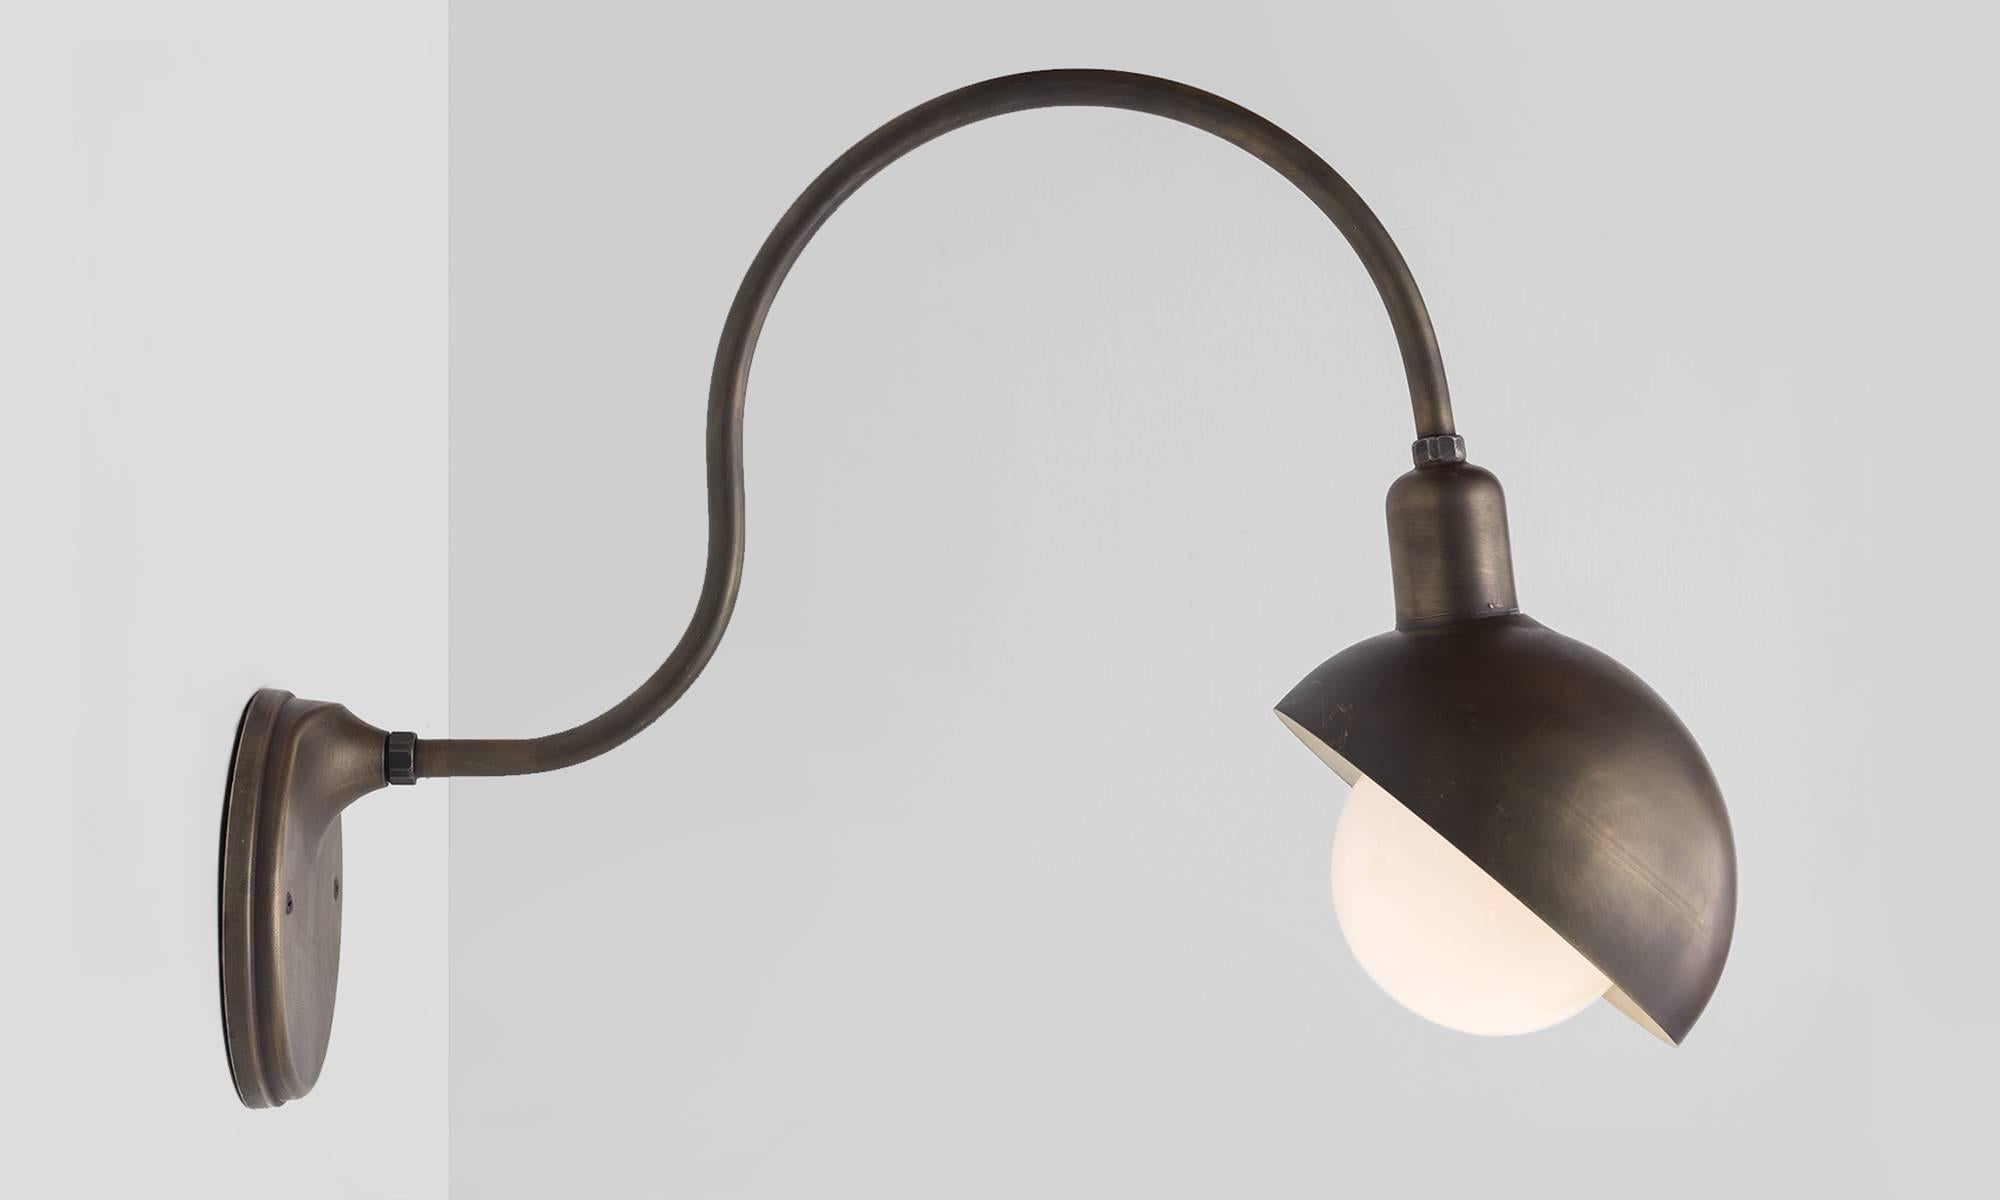 Elegant form in polished brass with generous curves.

Made in Italy

*Please Note: This fixture is made to order in Italy, and comes newly wired (eu wiring). It is not UL Listed. Standard Lead Time is 4-6 Weeks. We do not offer rewiring / UL listing